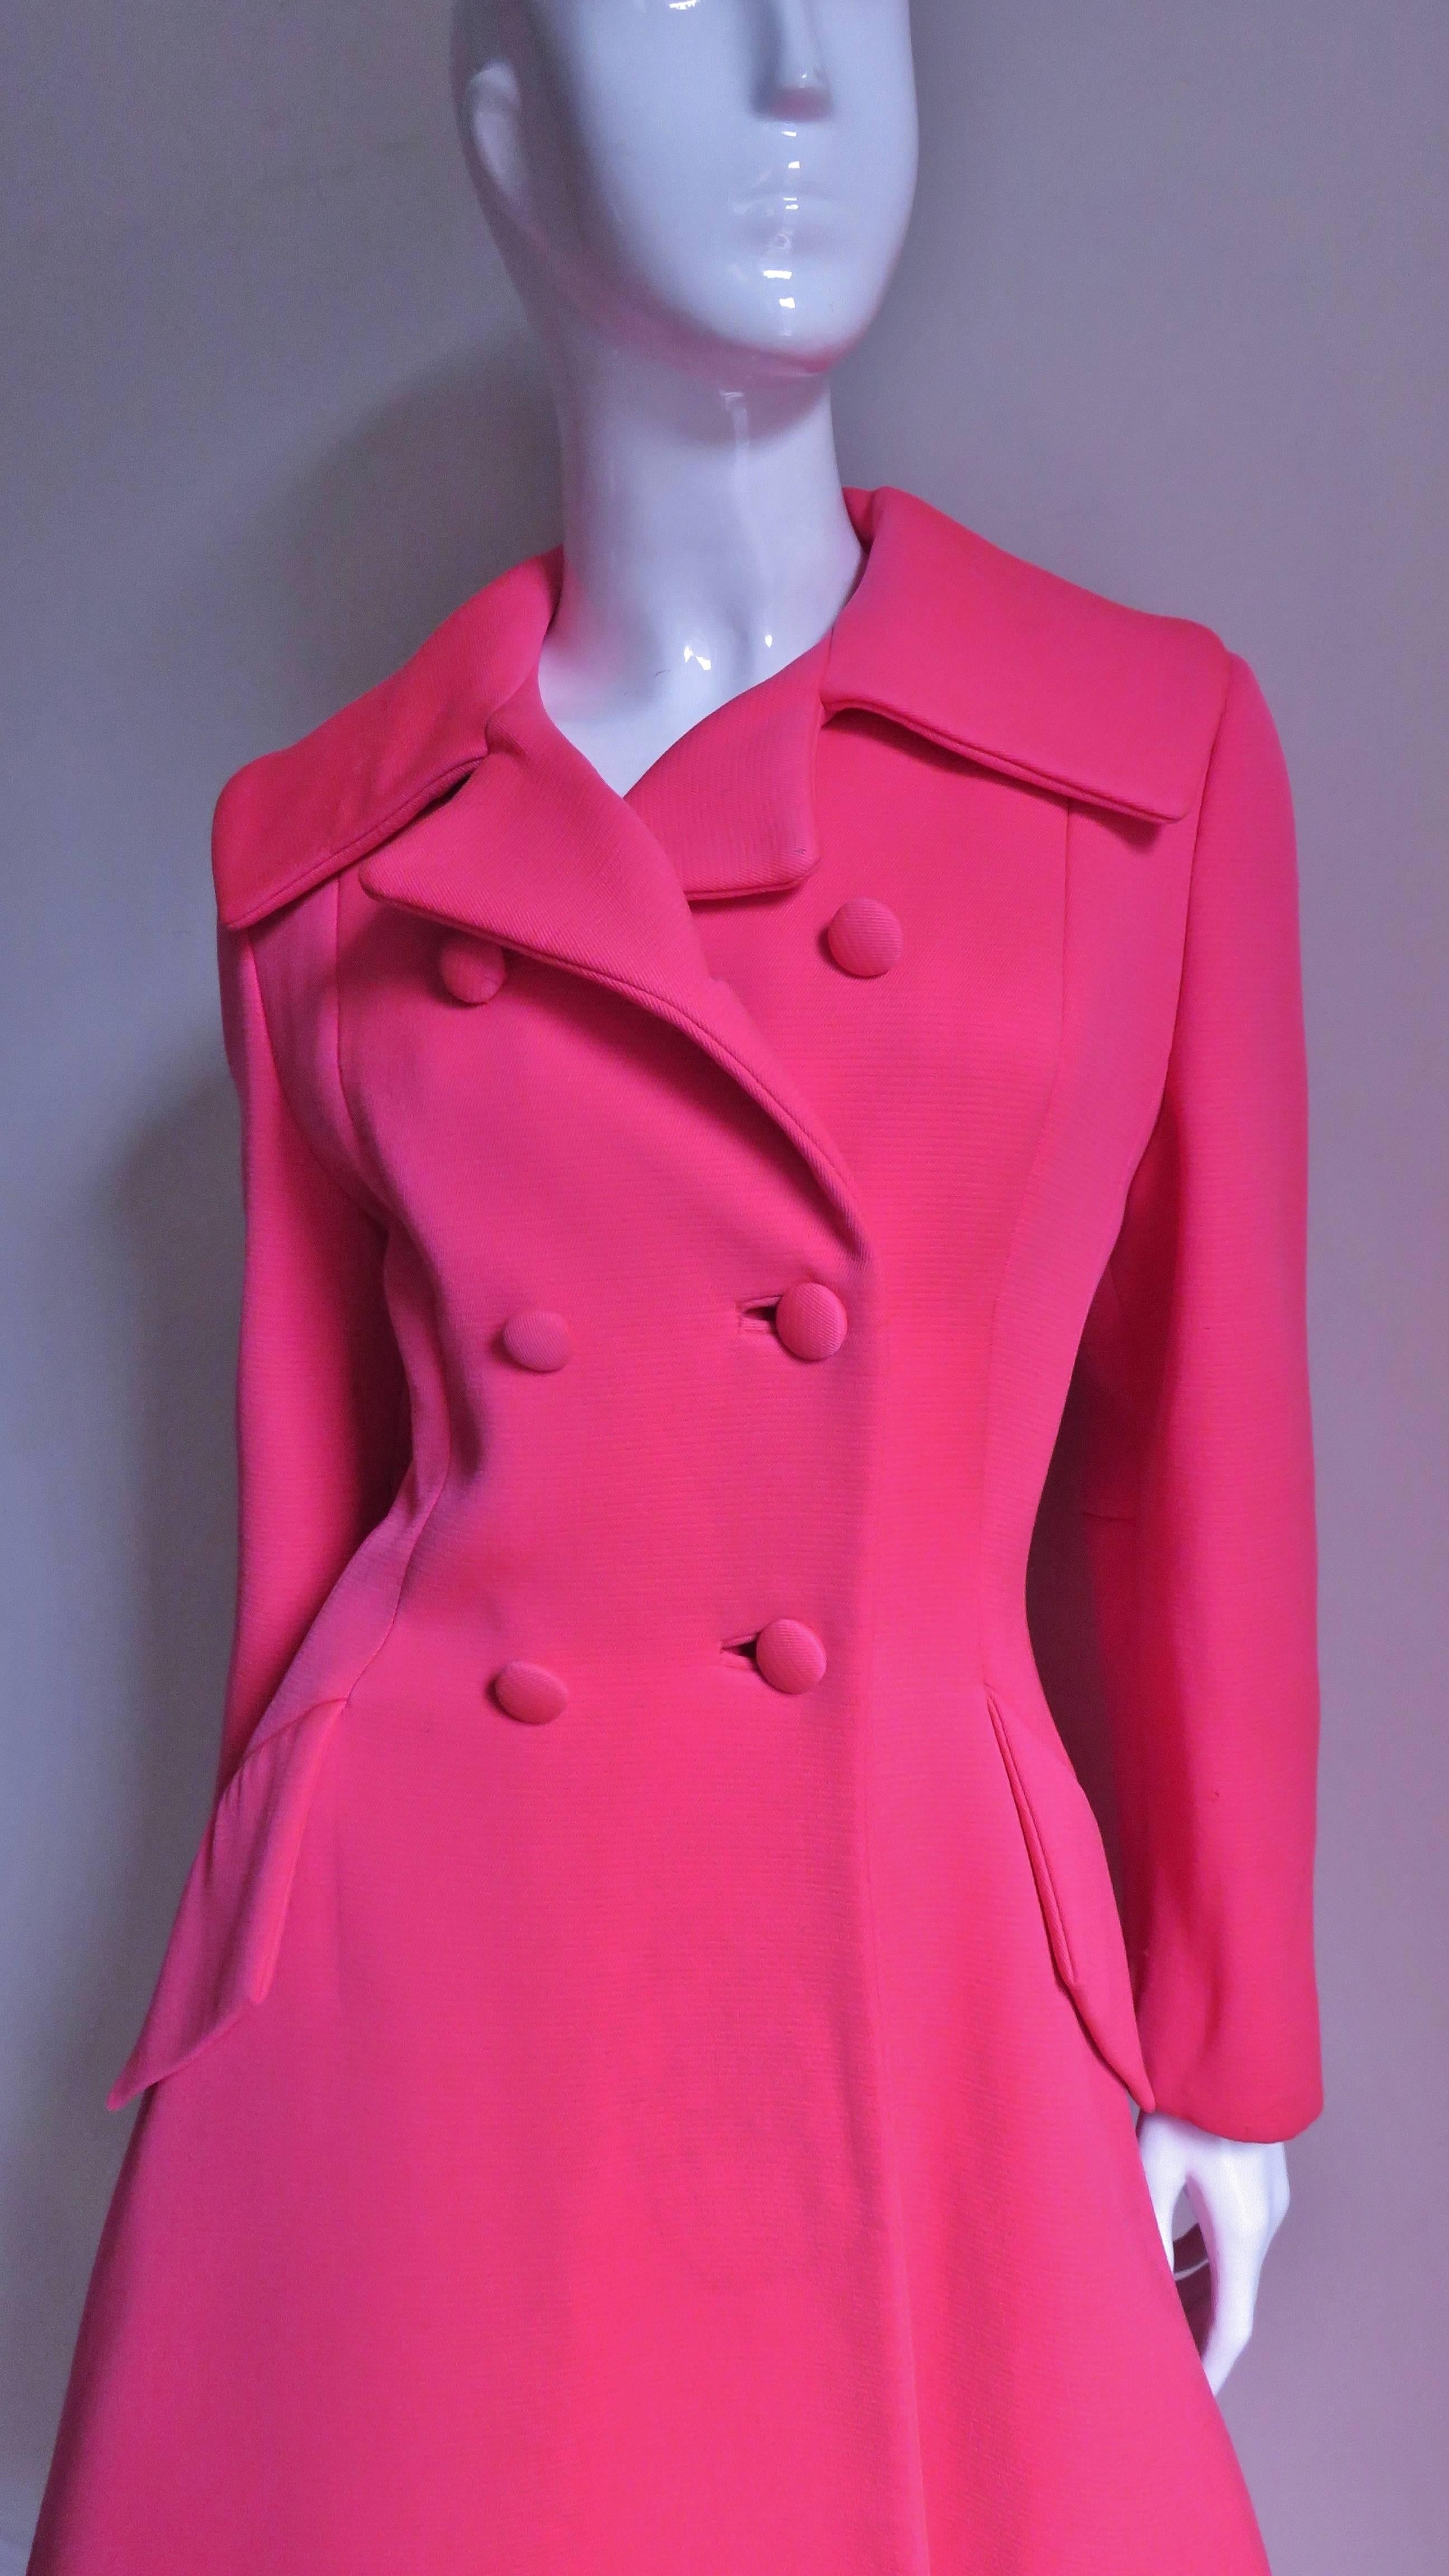 Made of shocking pink wool/silk twill this magenta pink 1950's Lilli Ann coat makes quite a statement. So stunning in it's brilliant pink color and flattering hour glass shape.  It is double breasted with self covered buttons and bound button holes